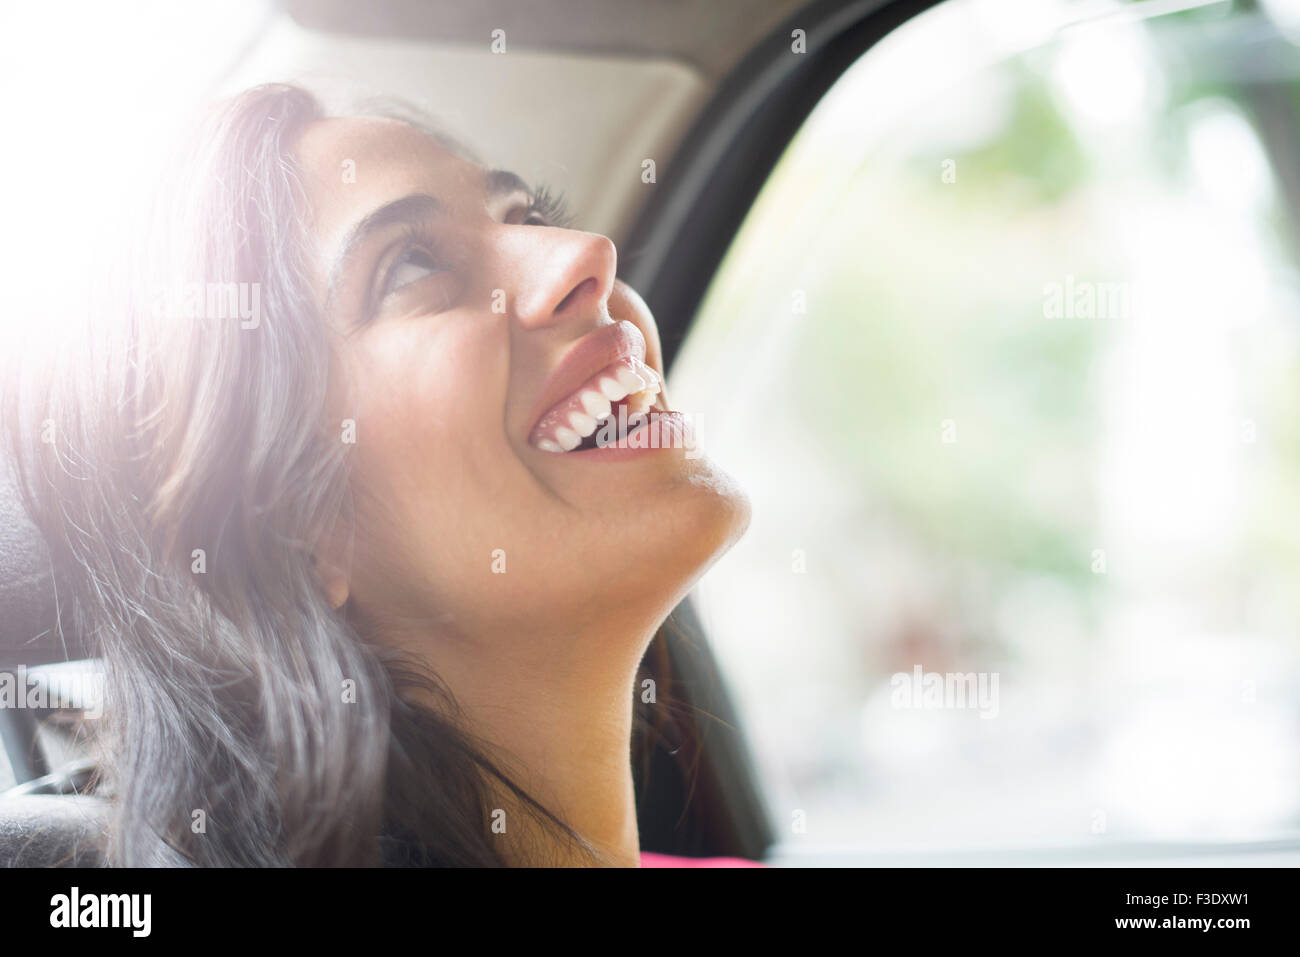 Woman laughing in car, portrait Stock Photo